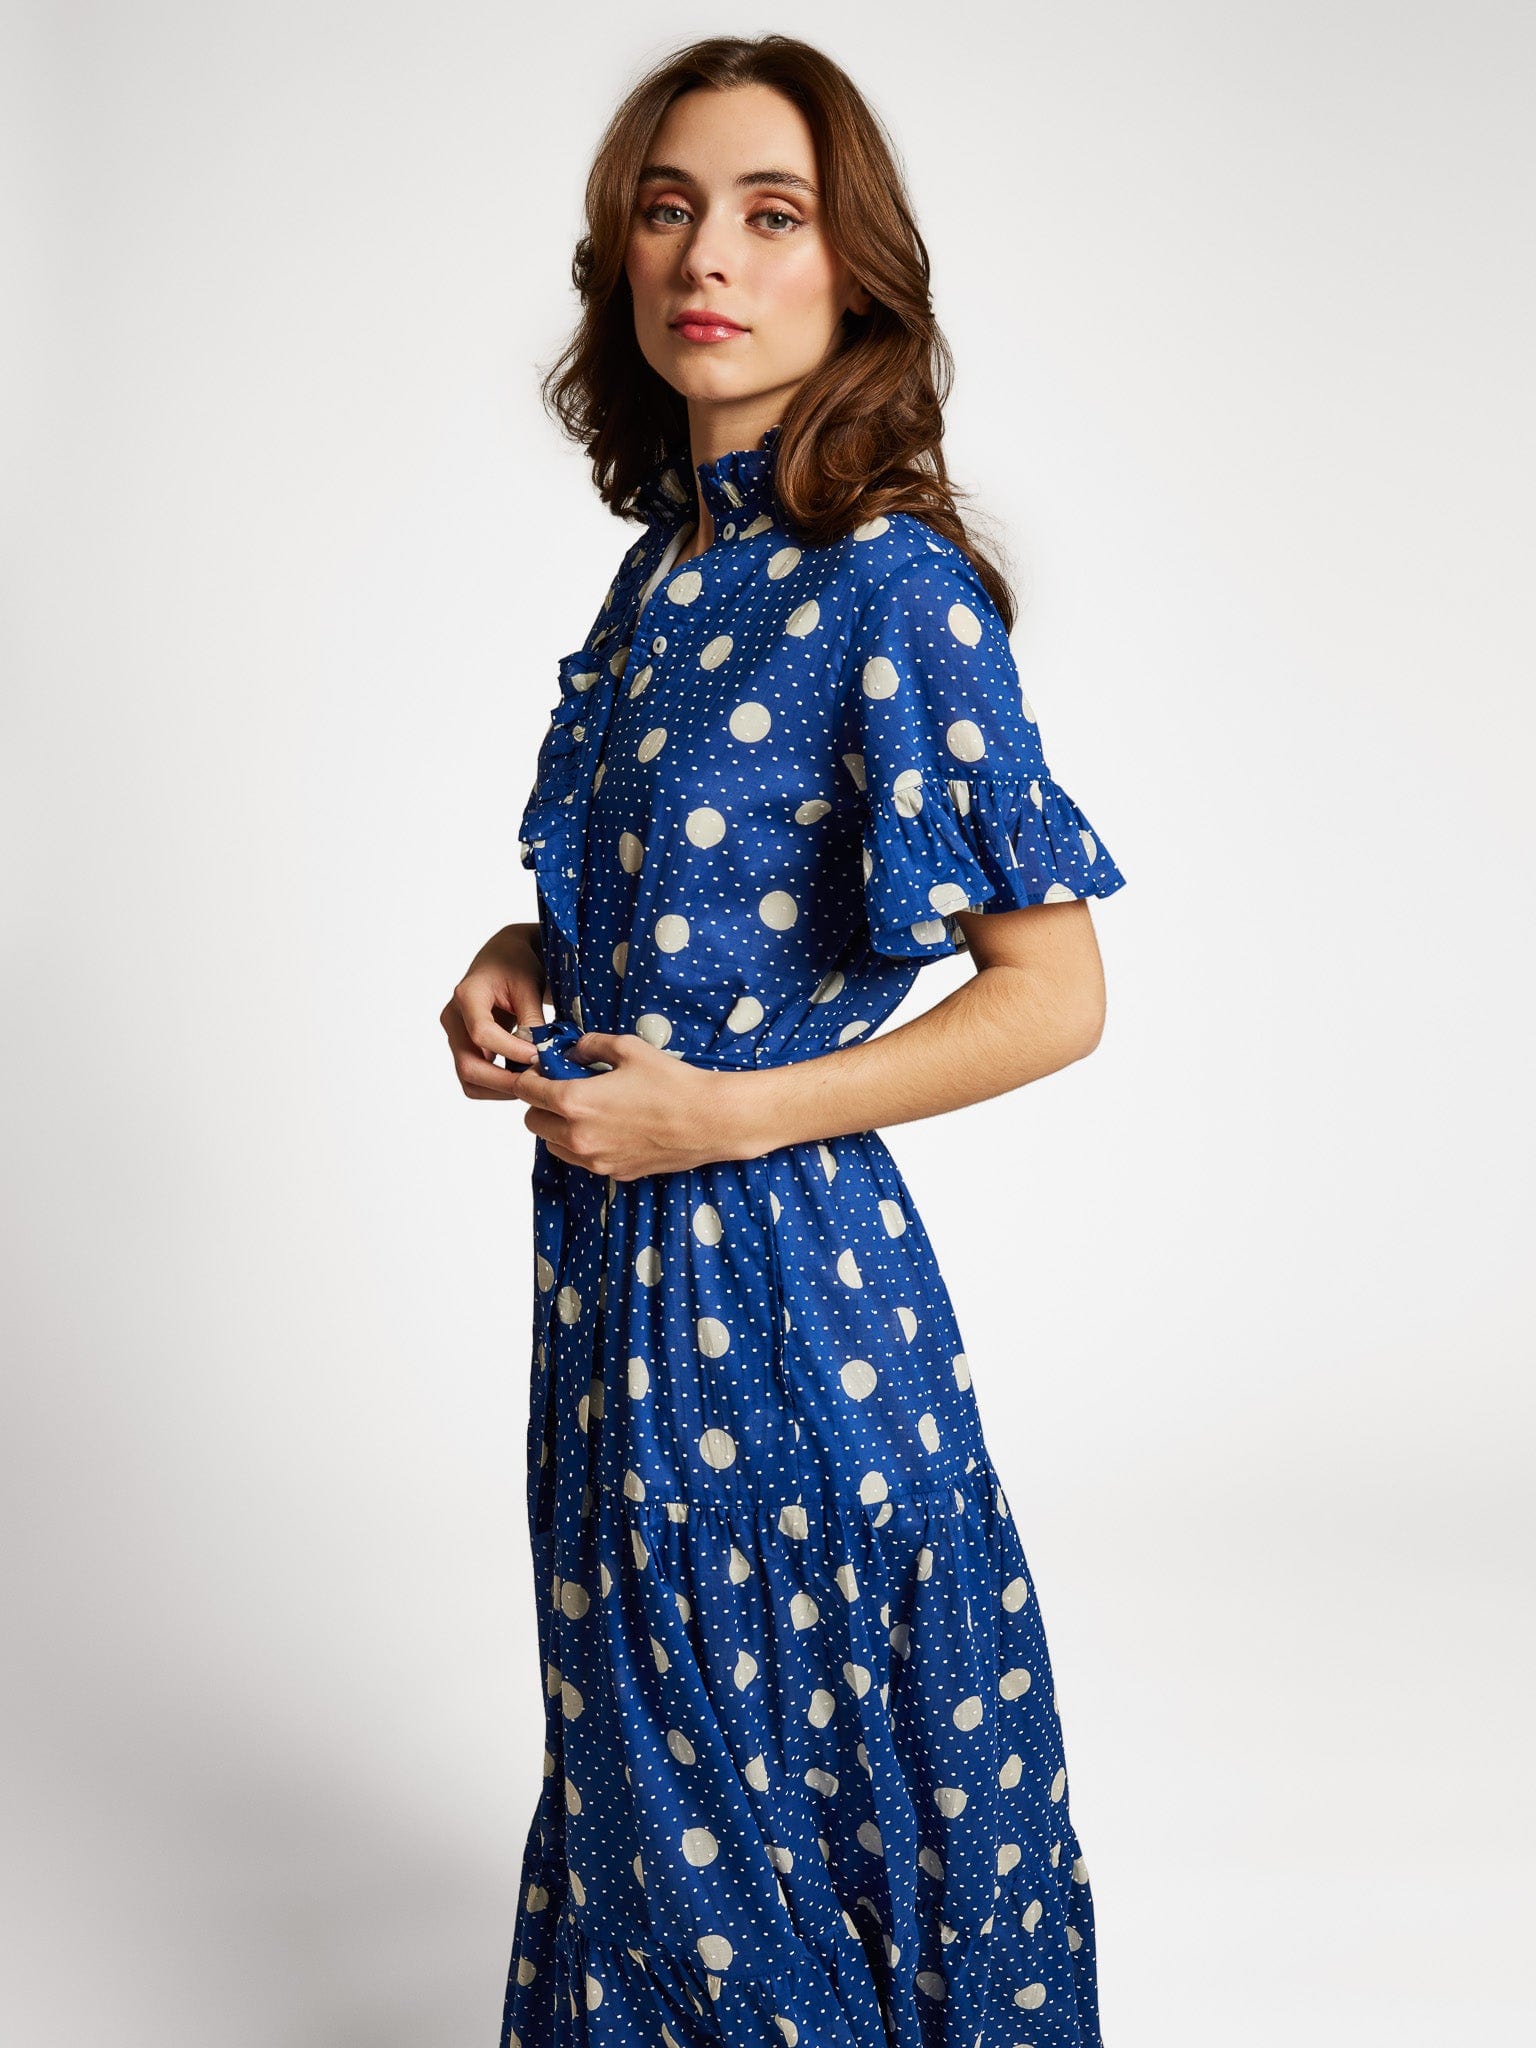 MILLE Clothing Victoria Dress in Summer Moon